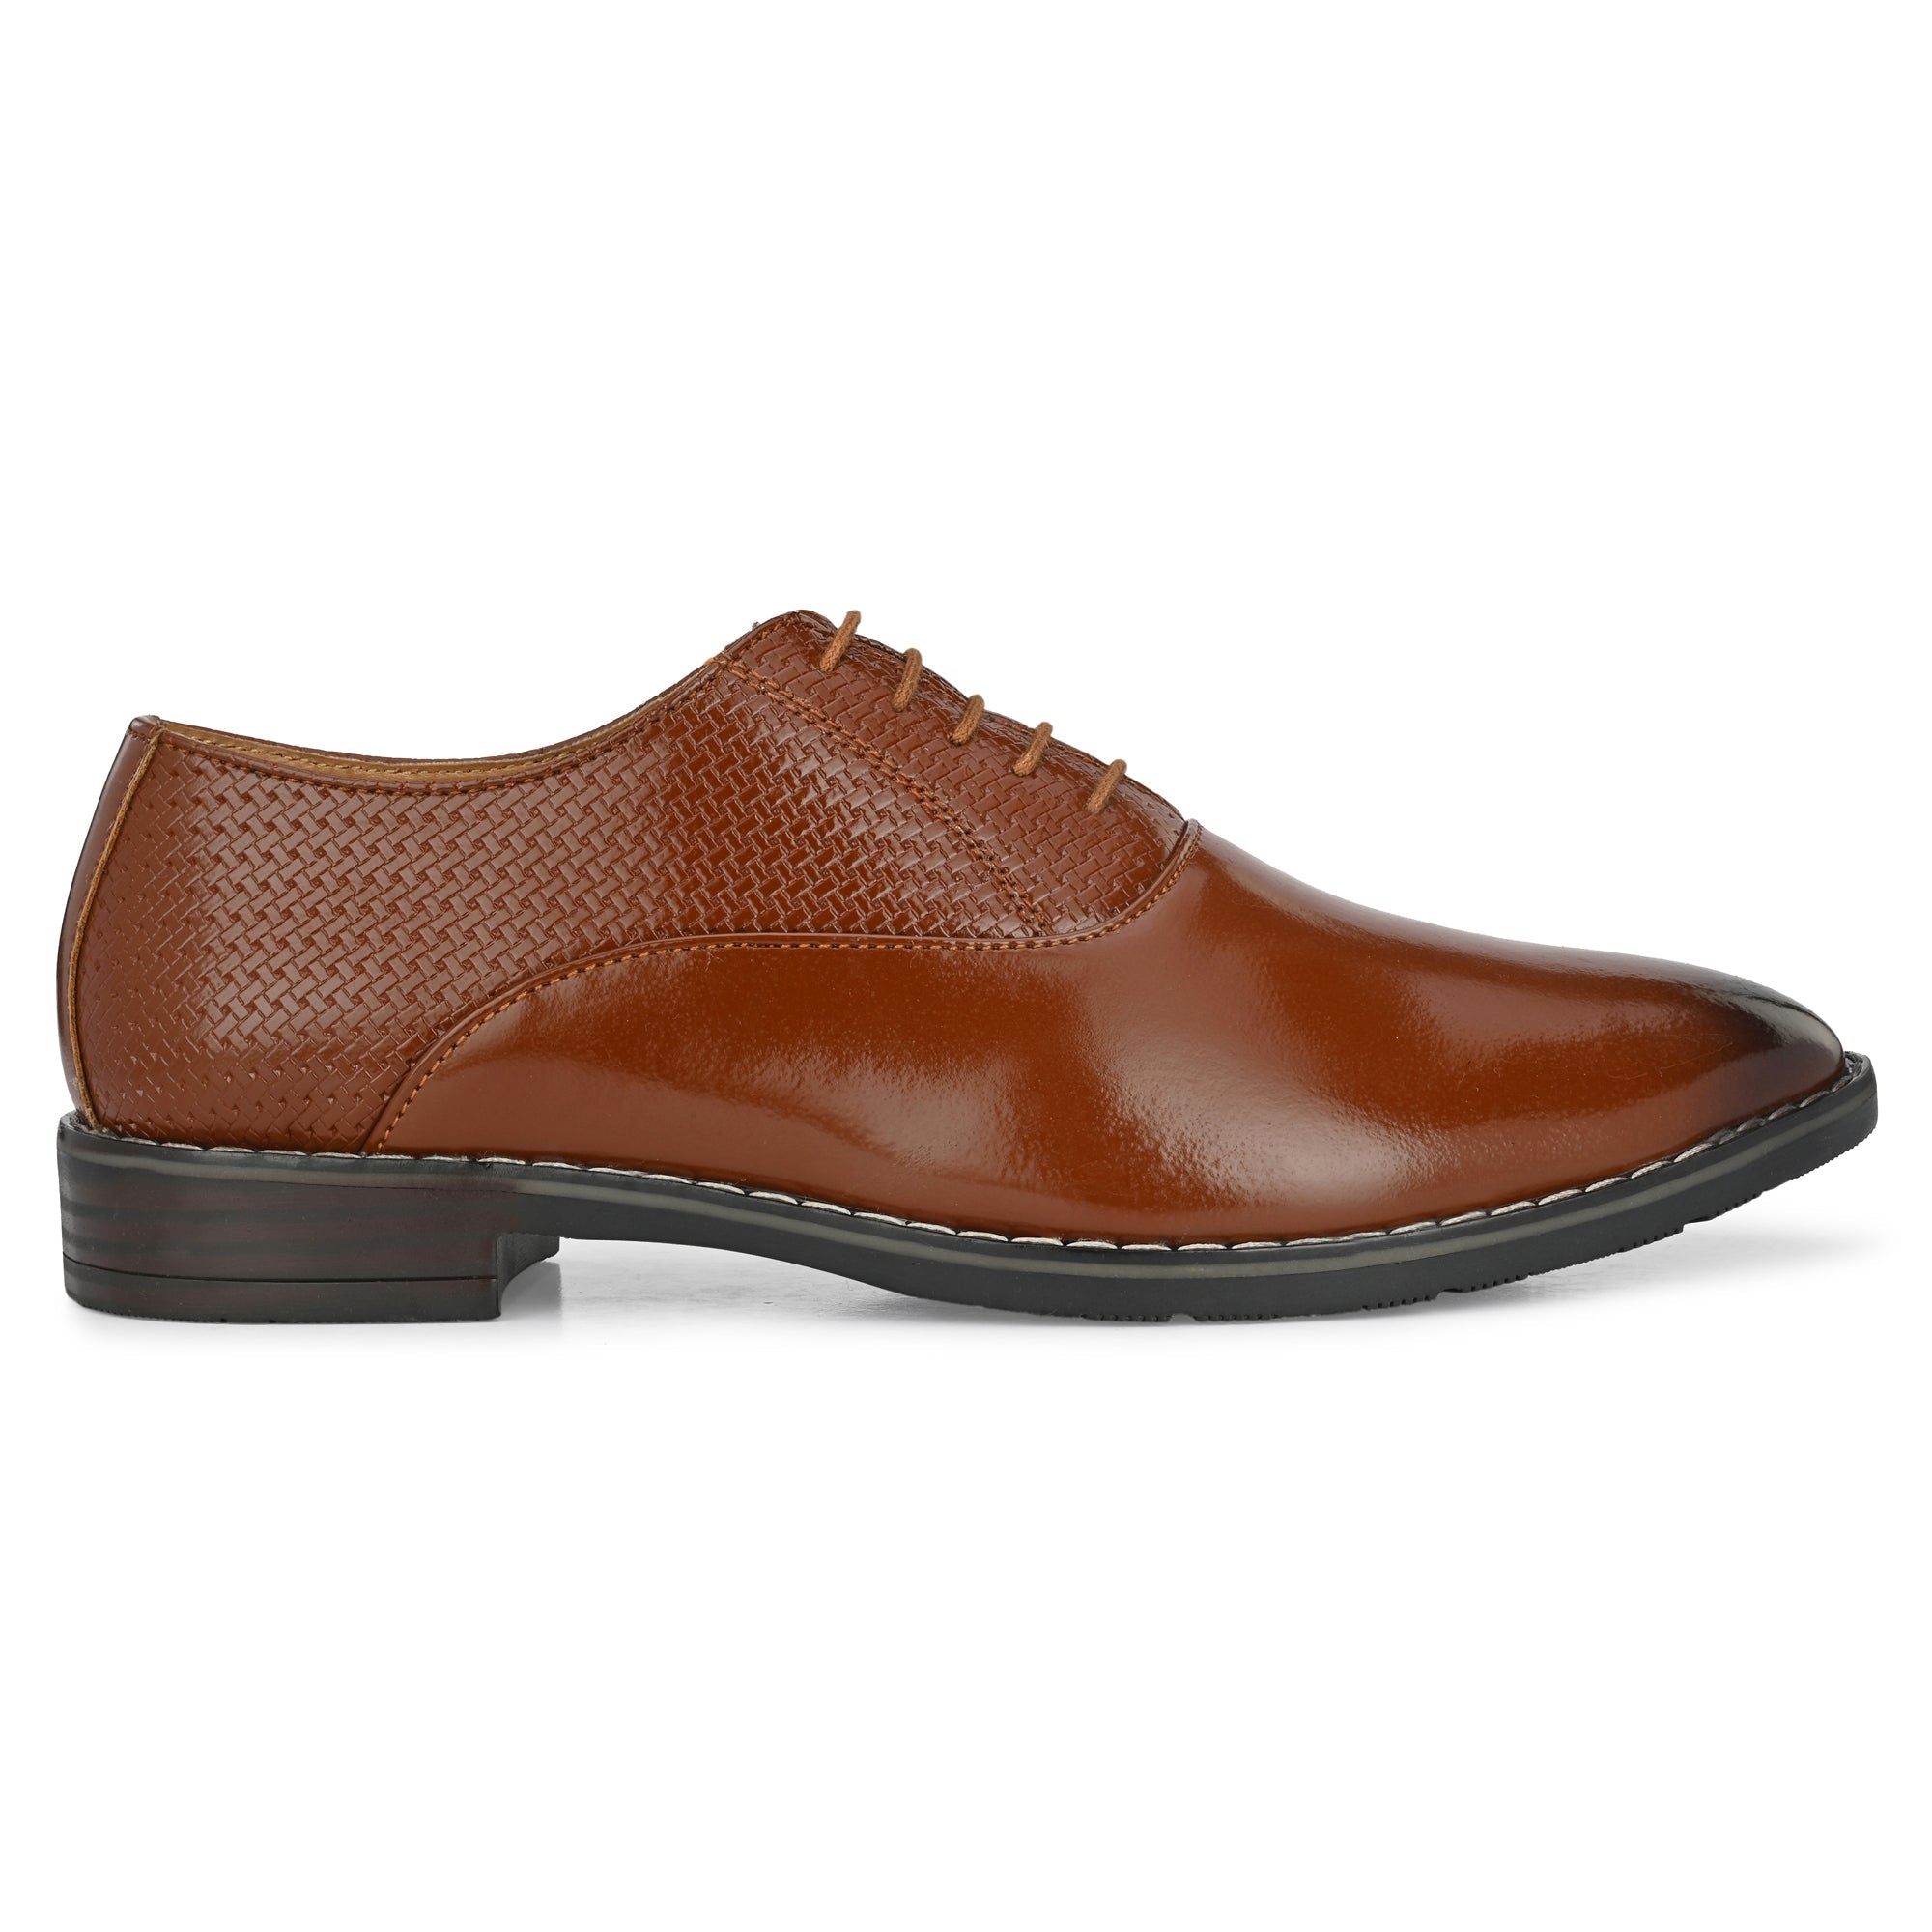 tan-formal-lace-up-attitudist-shoes-for-men-with-semi-chatai-design-sp6c